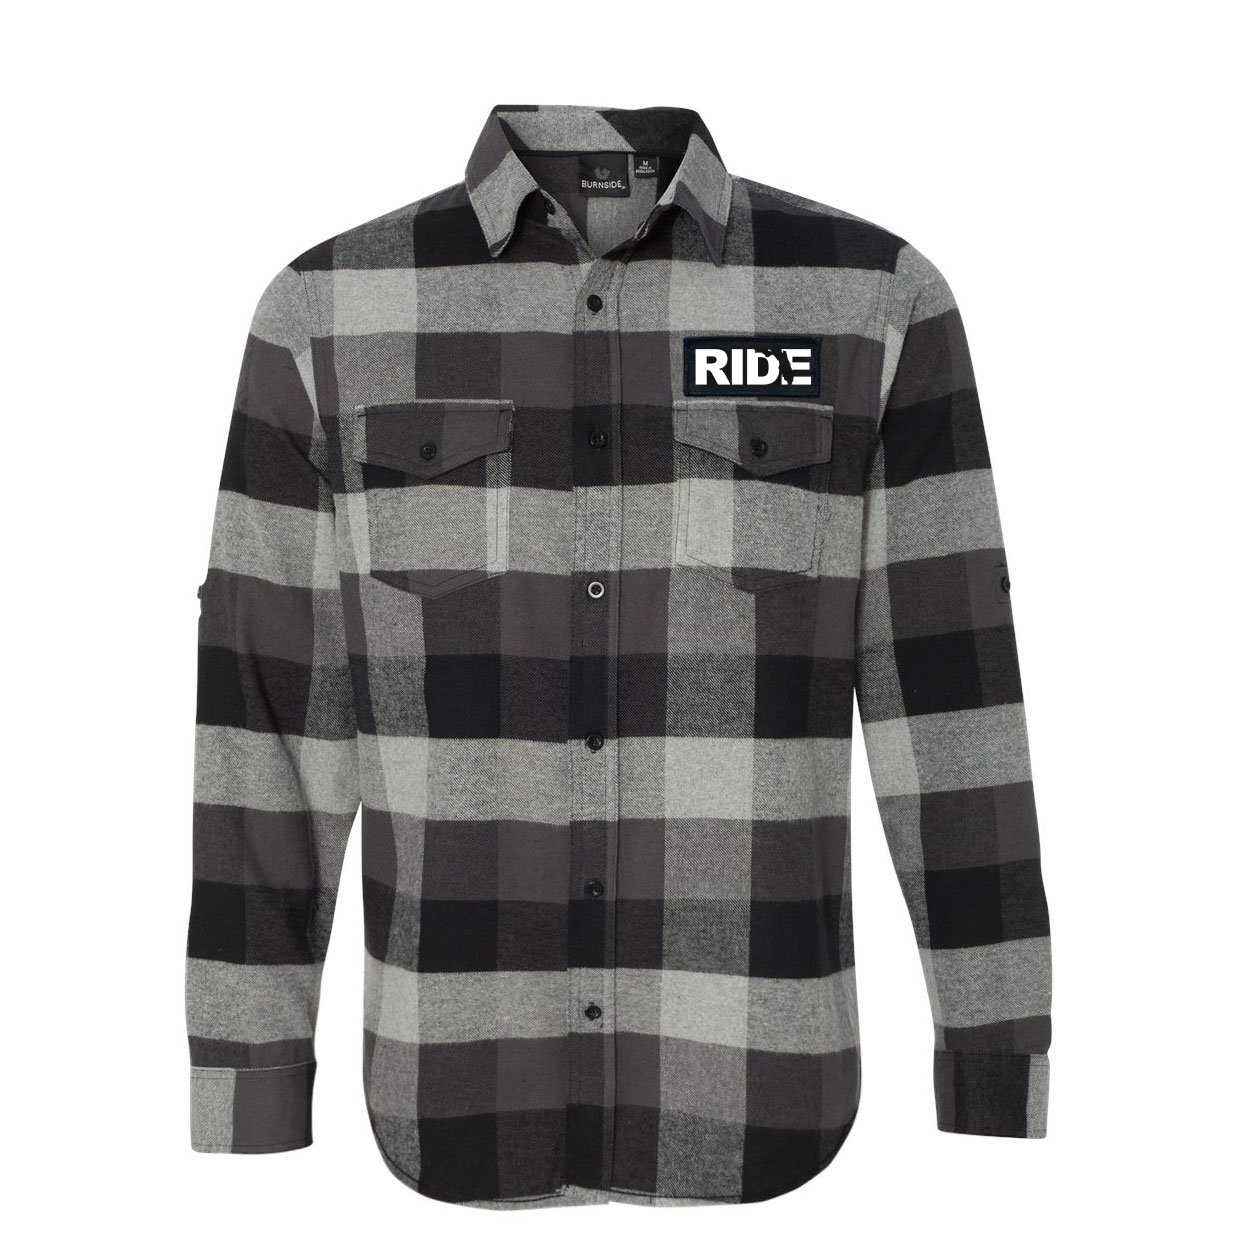 Ride Florida Classic Unisex Long Sleeve Woven Patch Flannel Shirt Black/Gray (White Logo)